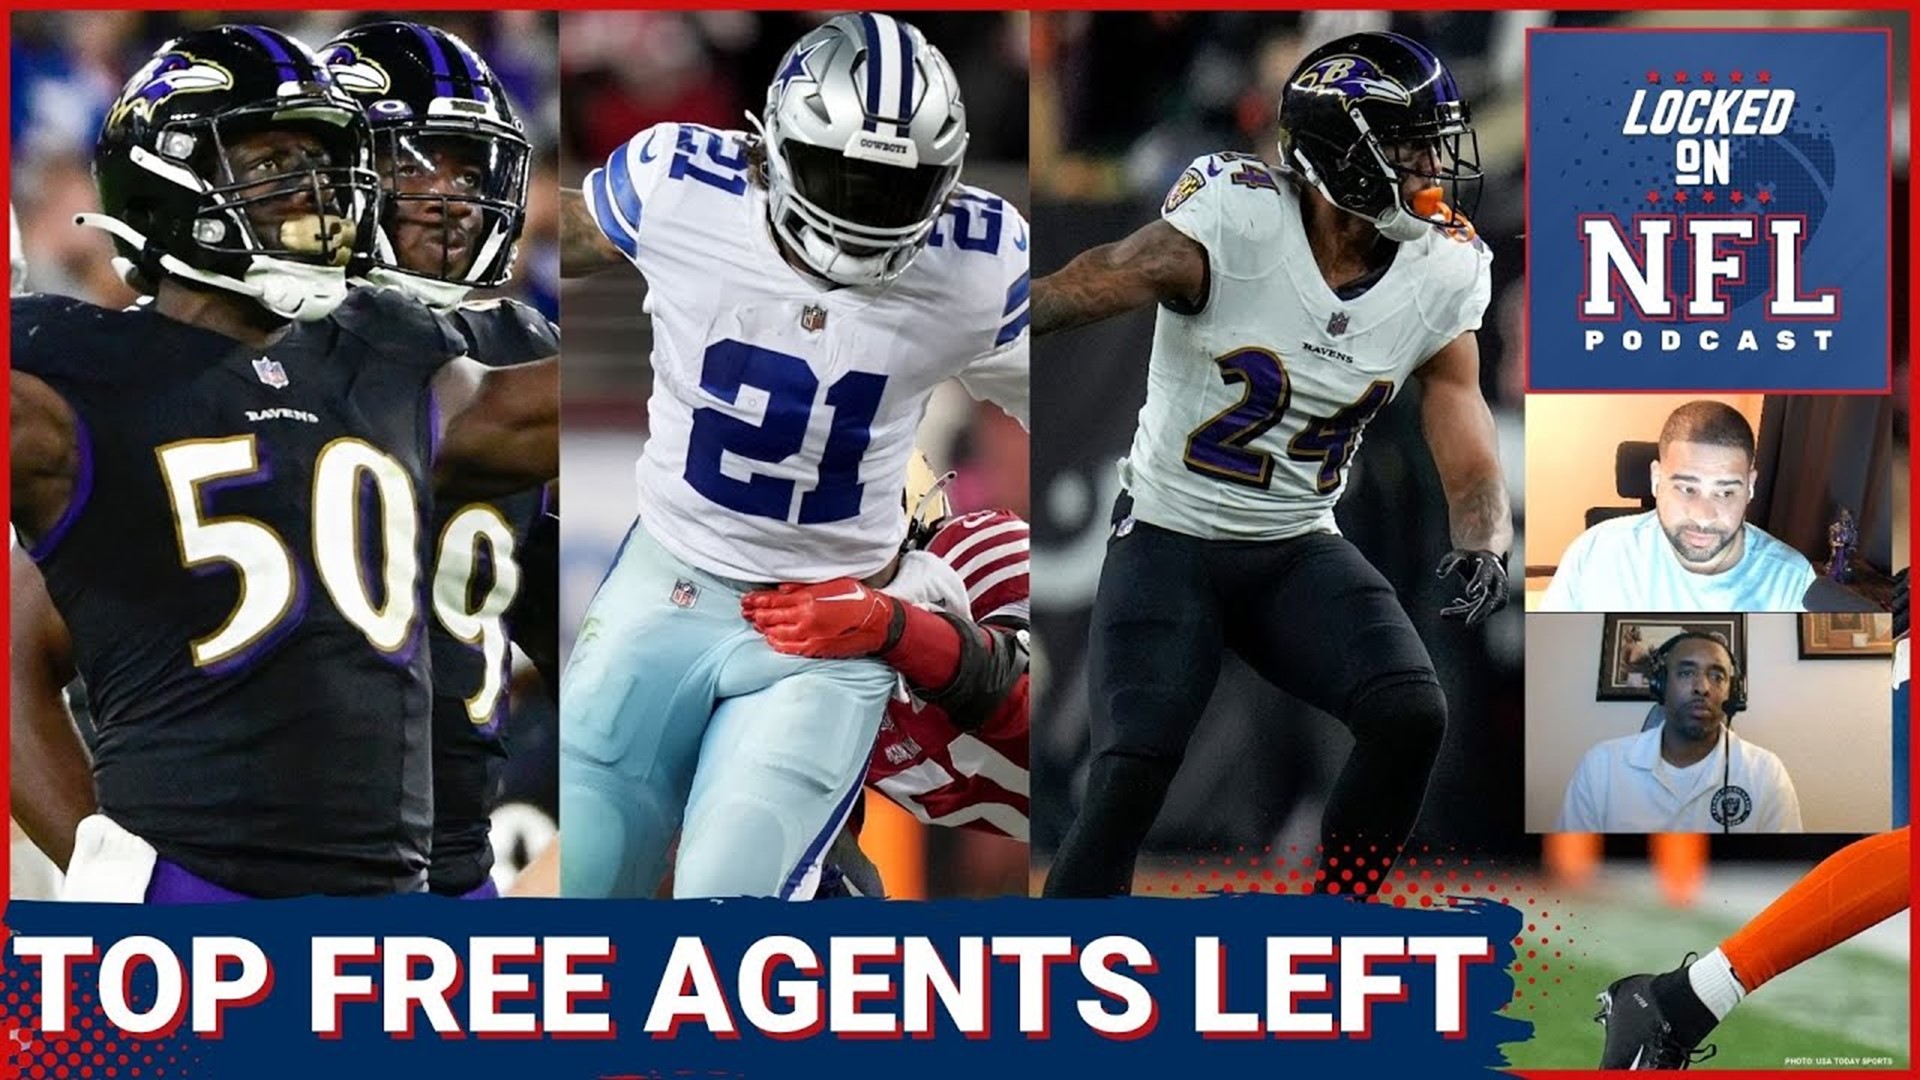 Top NFL Free Agents Available after NFL Draft. Marcus Peters Top CB? Who Gets Ezekiel Elliott?